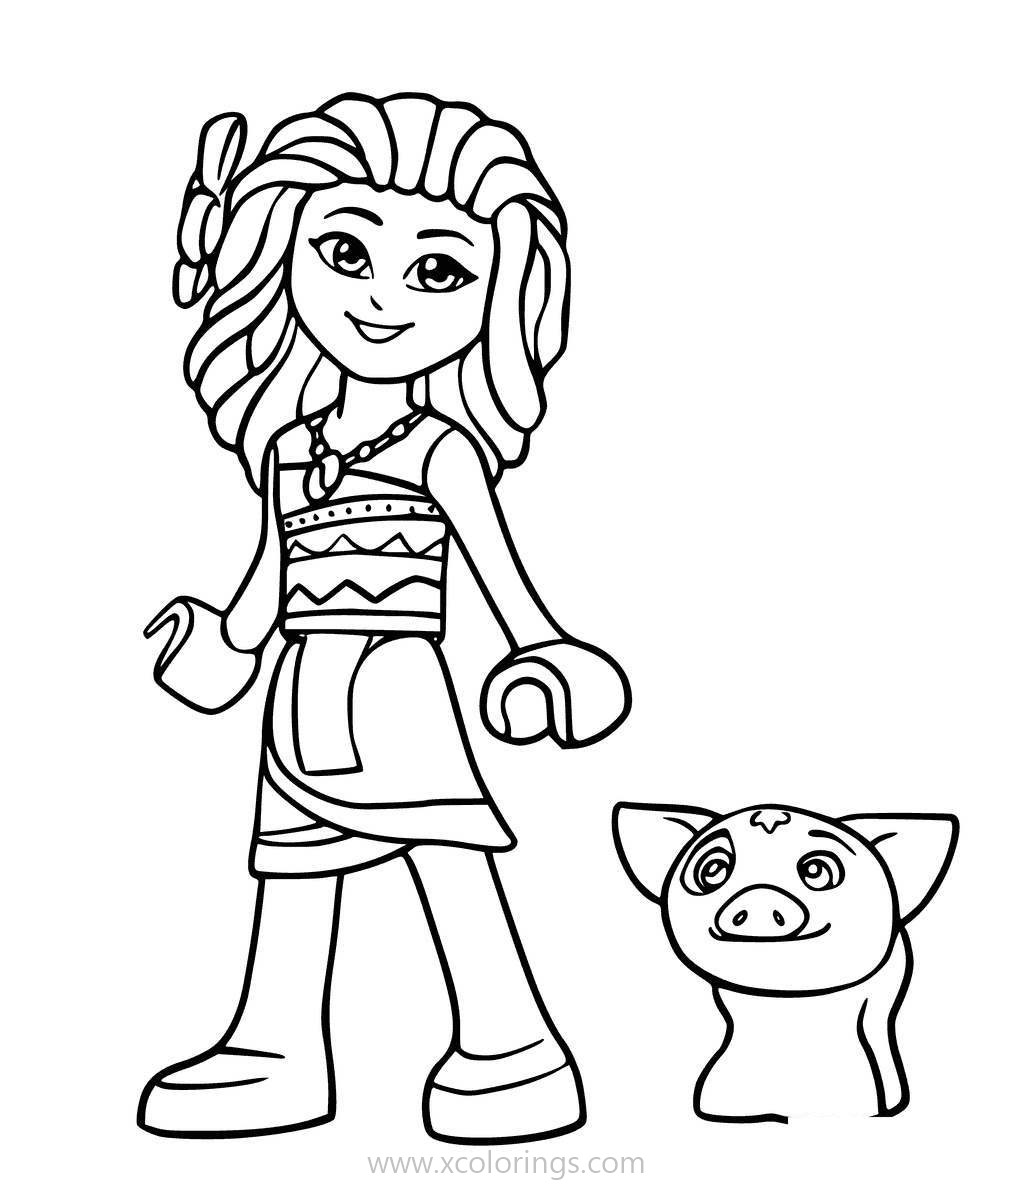 Free Lego Moana And Pig Pua Coloring Page printable